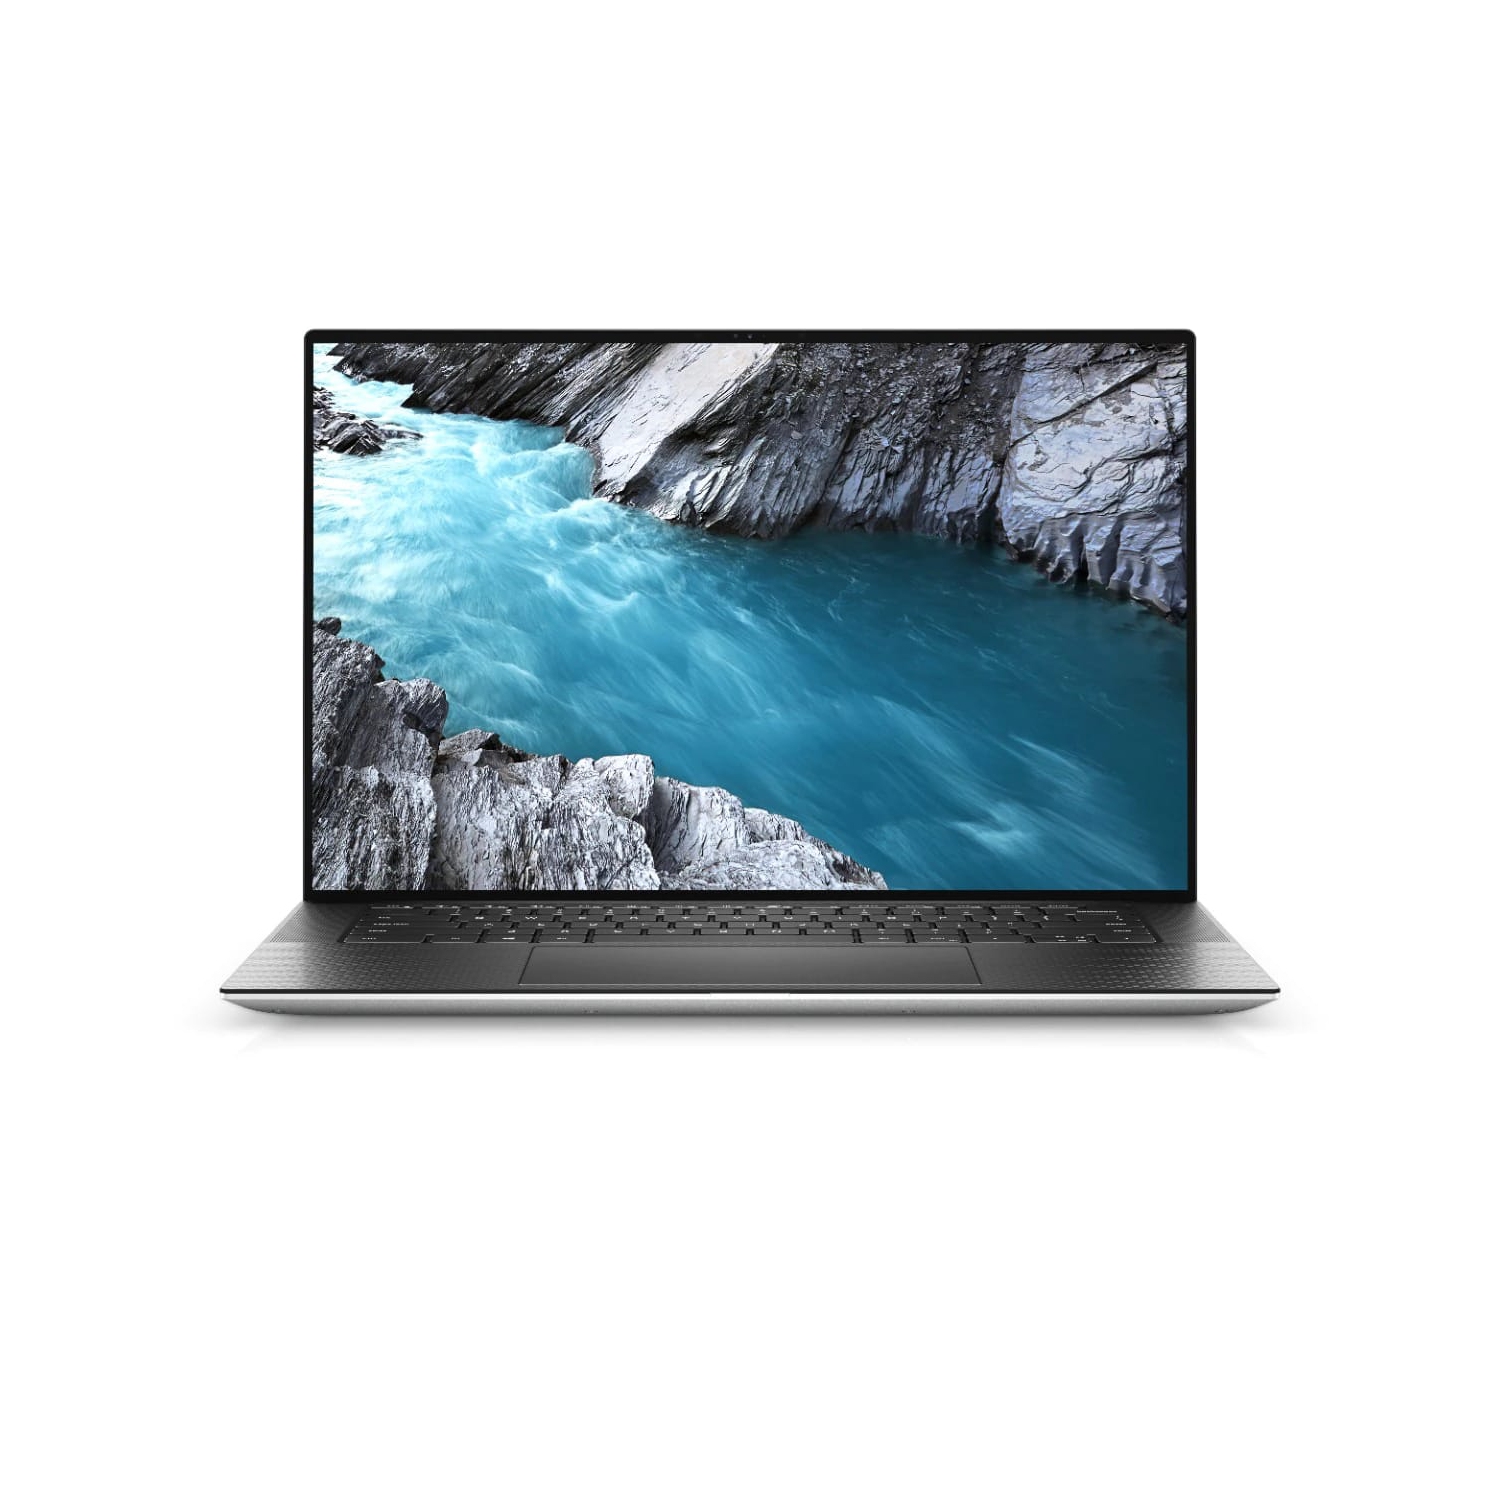 Refurbished (Excellent) - Dell XPS 15 9500 Laptop (2020) | 15" FHD+ | Core i7 - 2TB SSD - 32GB RAM - 1650 Ti | 6 Cores @ 5 GHz - 10th Gen CPU Certified Refurbished